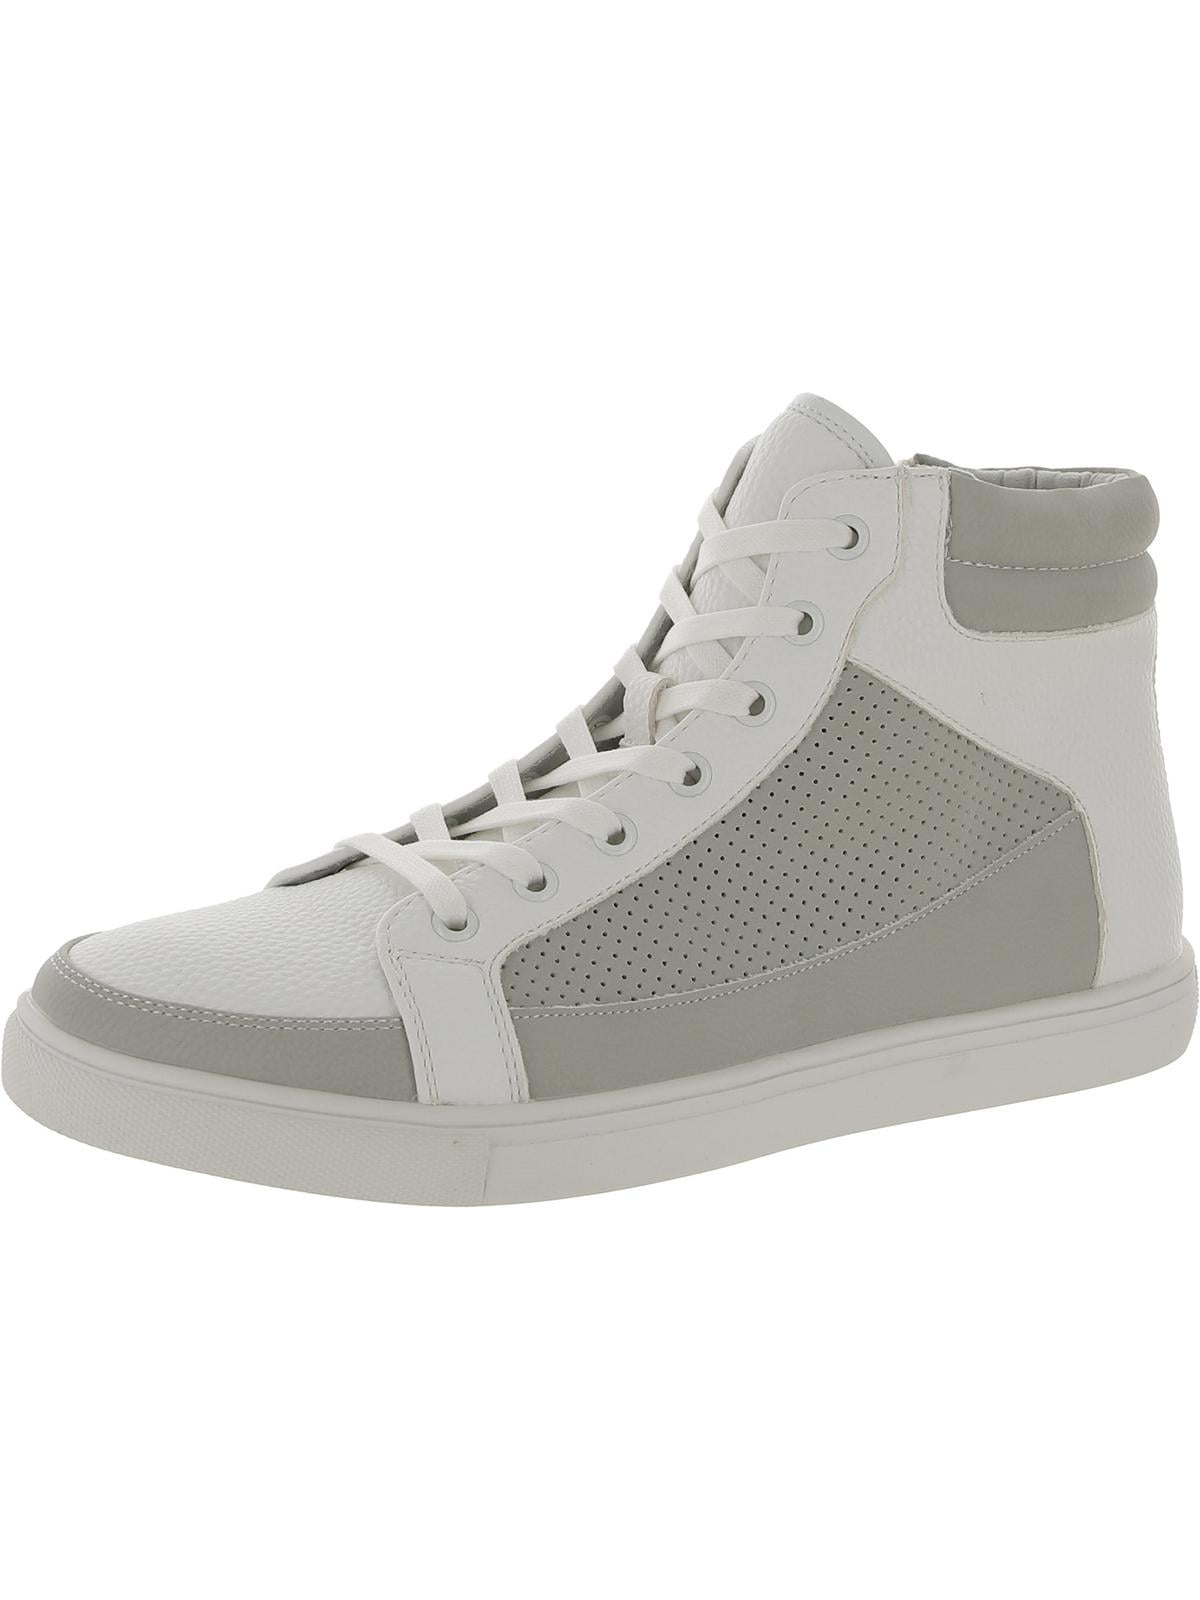 Unlisted Kenneth Cole Mens Stand Faux Leather Lace-Up High-Top Sneakers ...